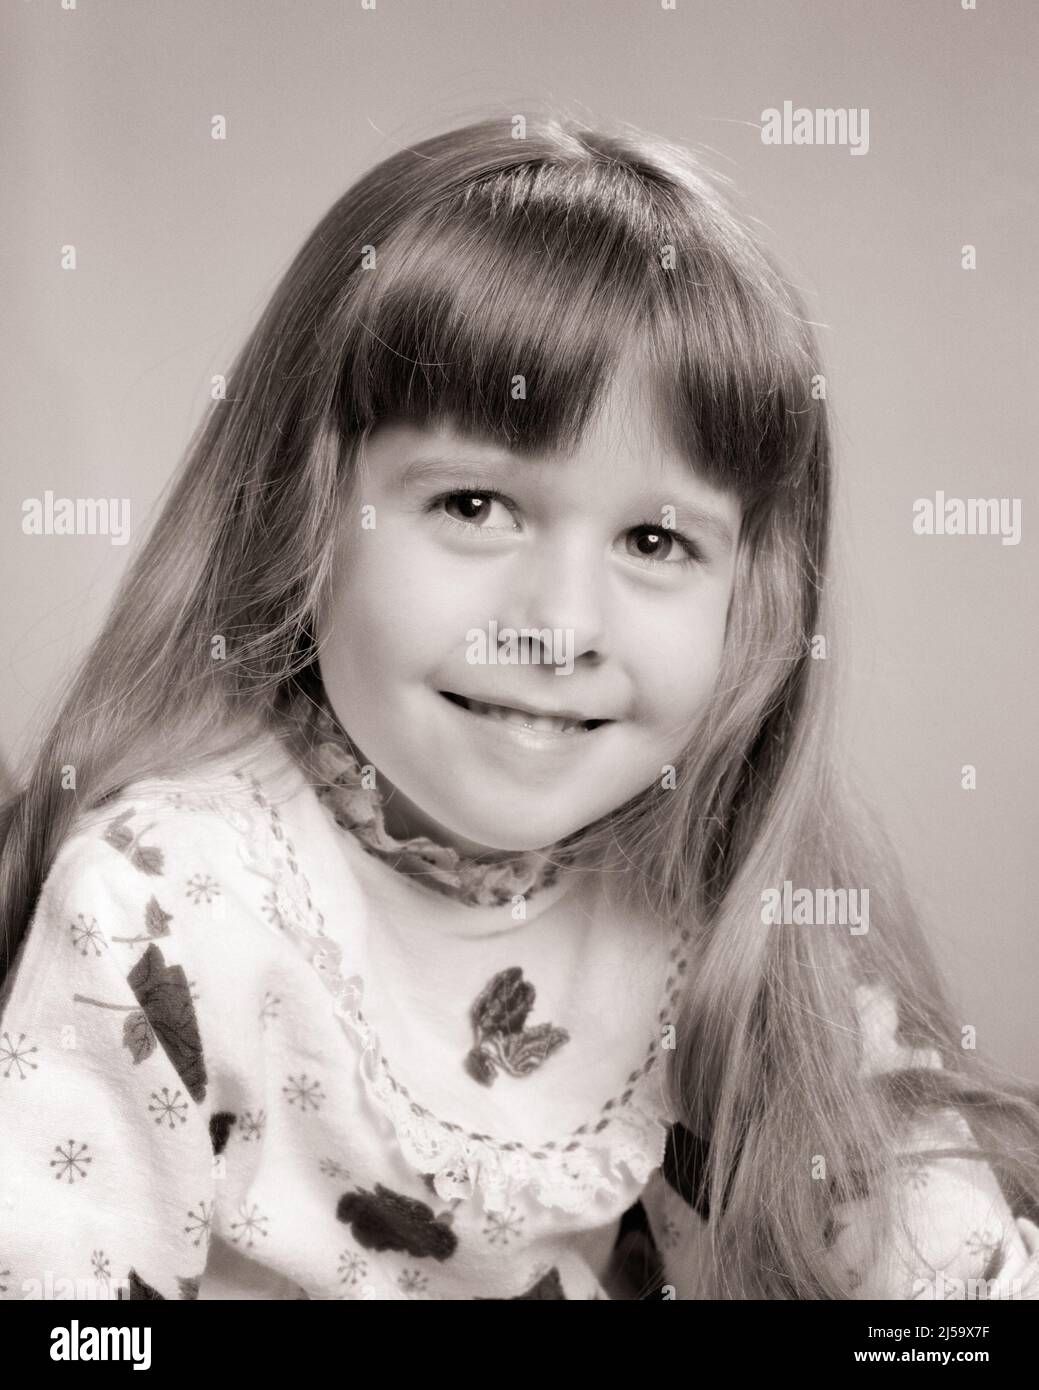 1970s PORTRAIT OF SMILING LITTLE GIRL WITH LONG HAIR AND BANGS LOOKING AT CAMERA - j13181 HAR001 HARS JOYFUL PLEASANT AGREEABLE CHARMING JUVENILES LOVABLE PERSONABLE PLEASING ADORABLE APPEALING BANGS BLACK AND WHITE CAUCASIAN ETHNICITY HAR001 OLD FASHIONED Stock Photo